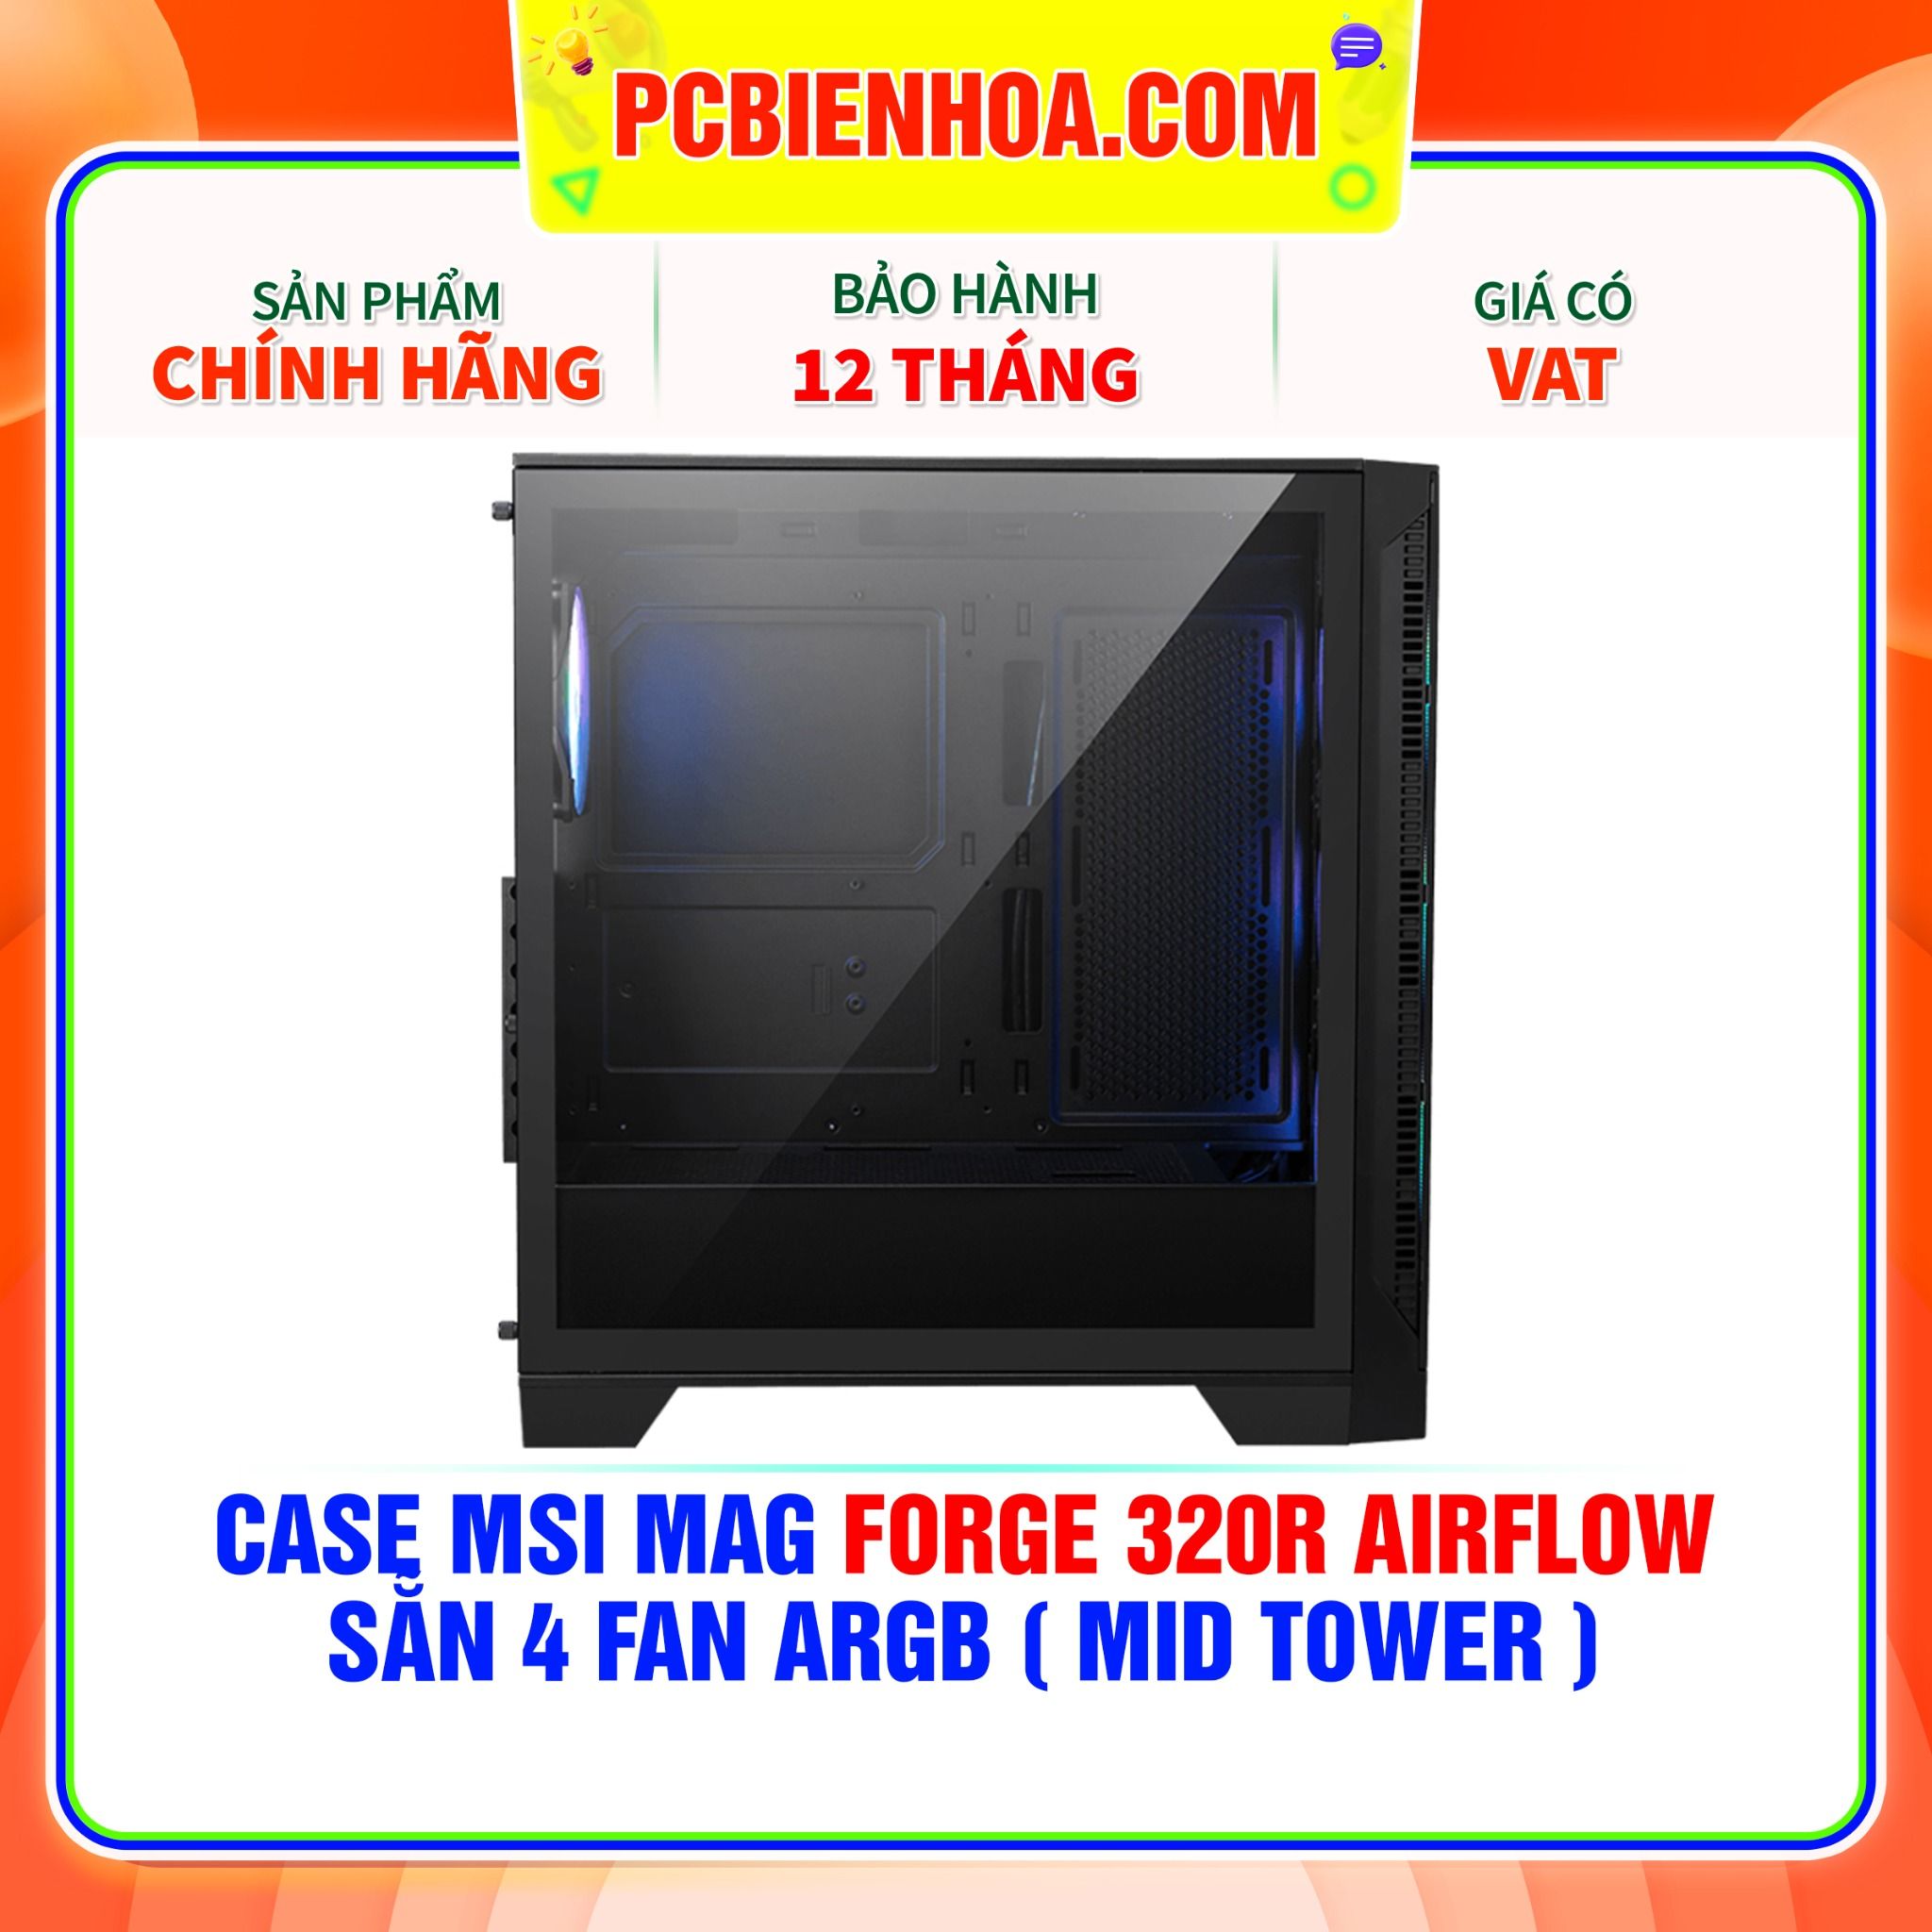  CASE MSI MAG FORGE 320R AIRFLOW - SẴN 4 FAN ARGB ( MID TOWER ) 